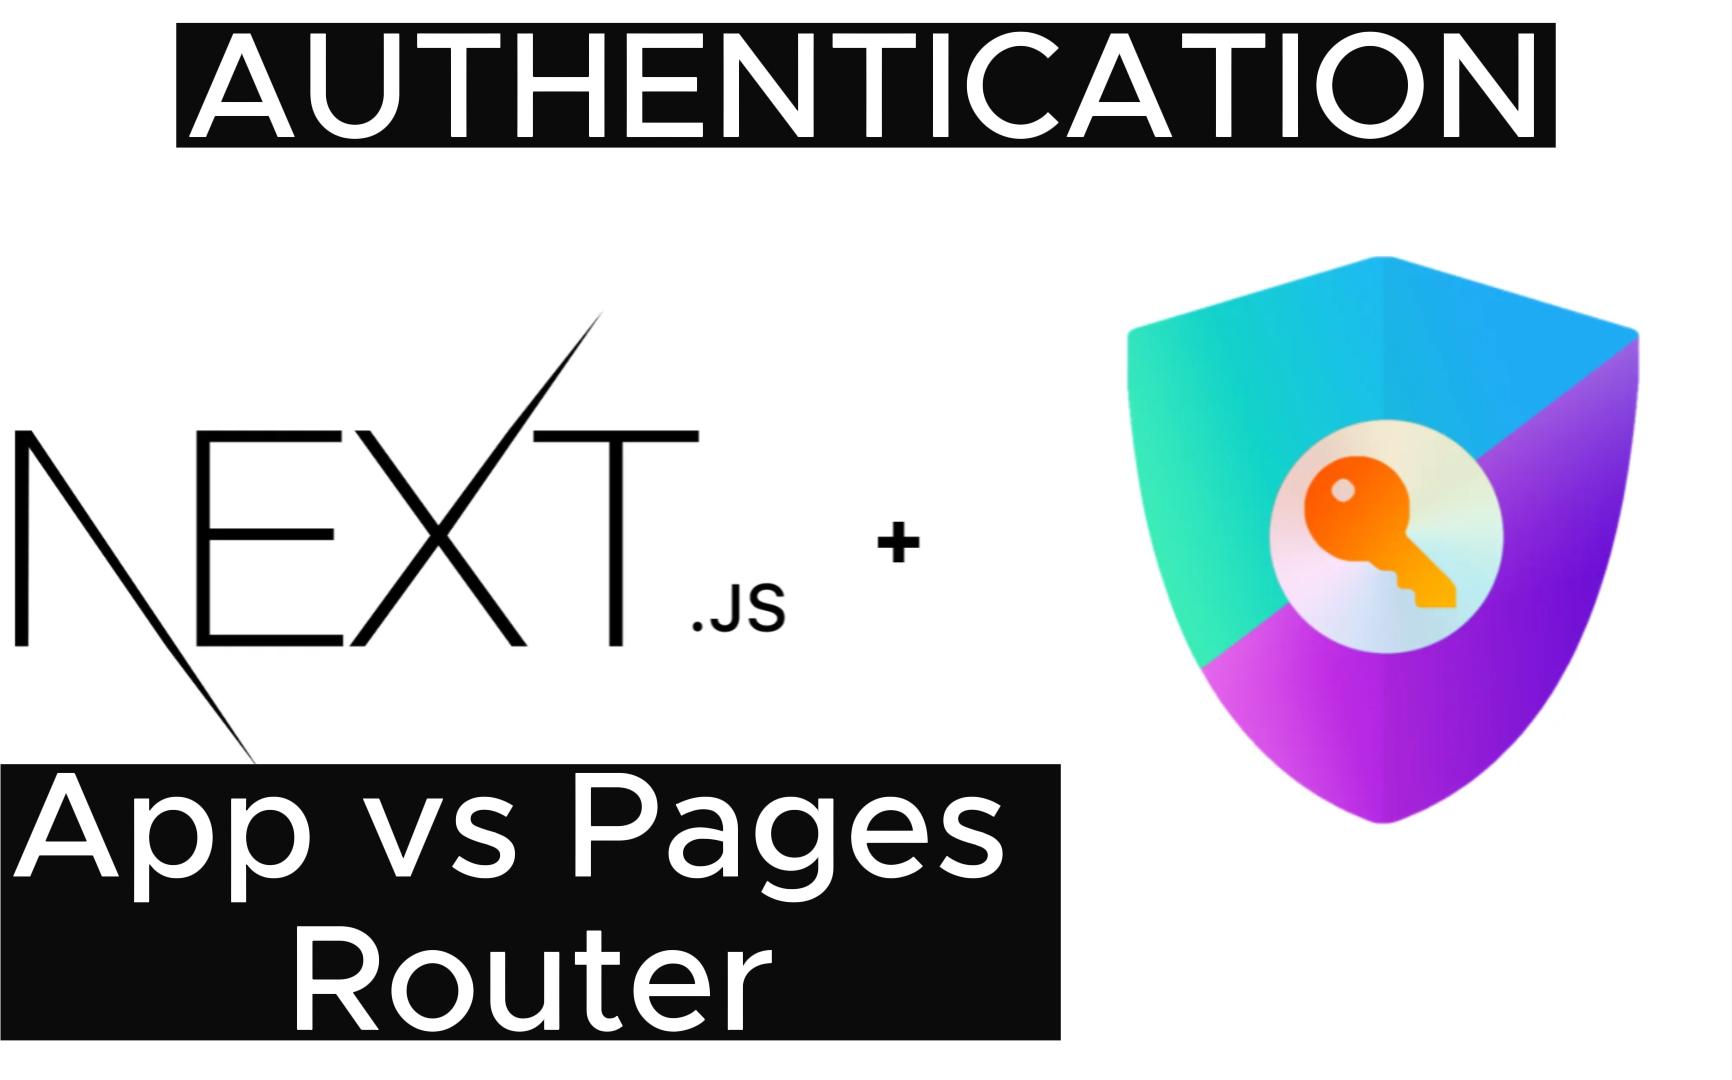 extjs 13 App Router VS Pages Router - How To Authenticate Users In Nextjs With NextAuth